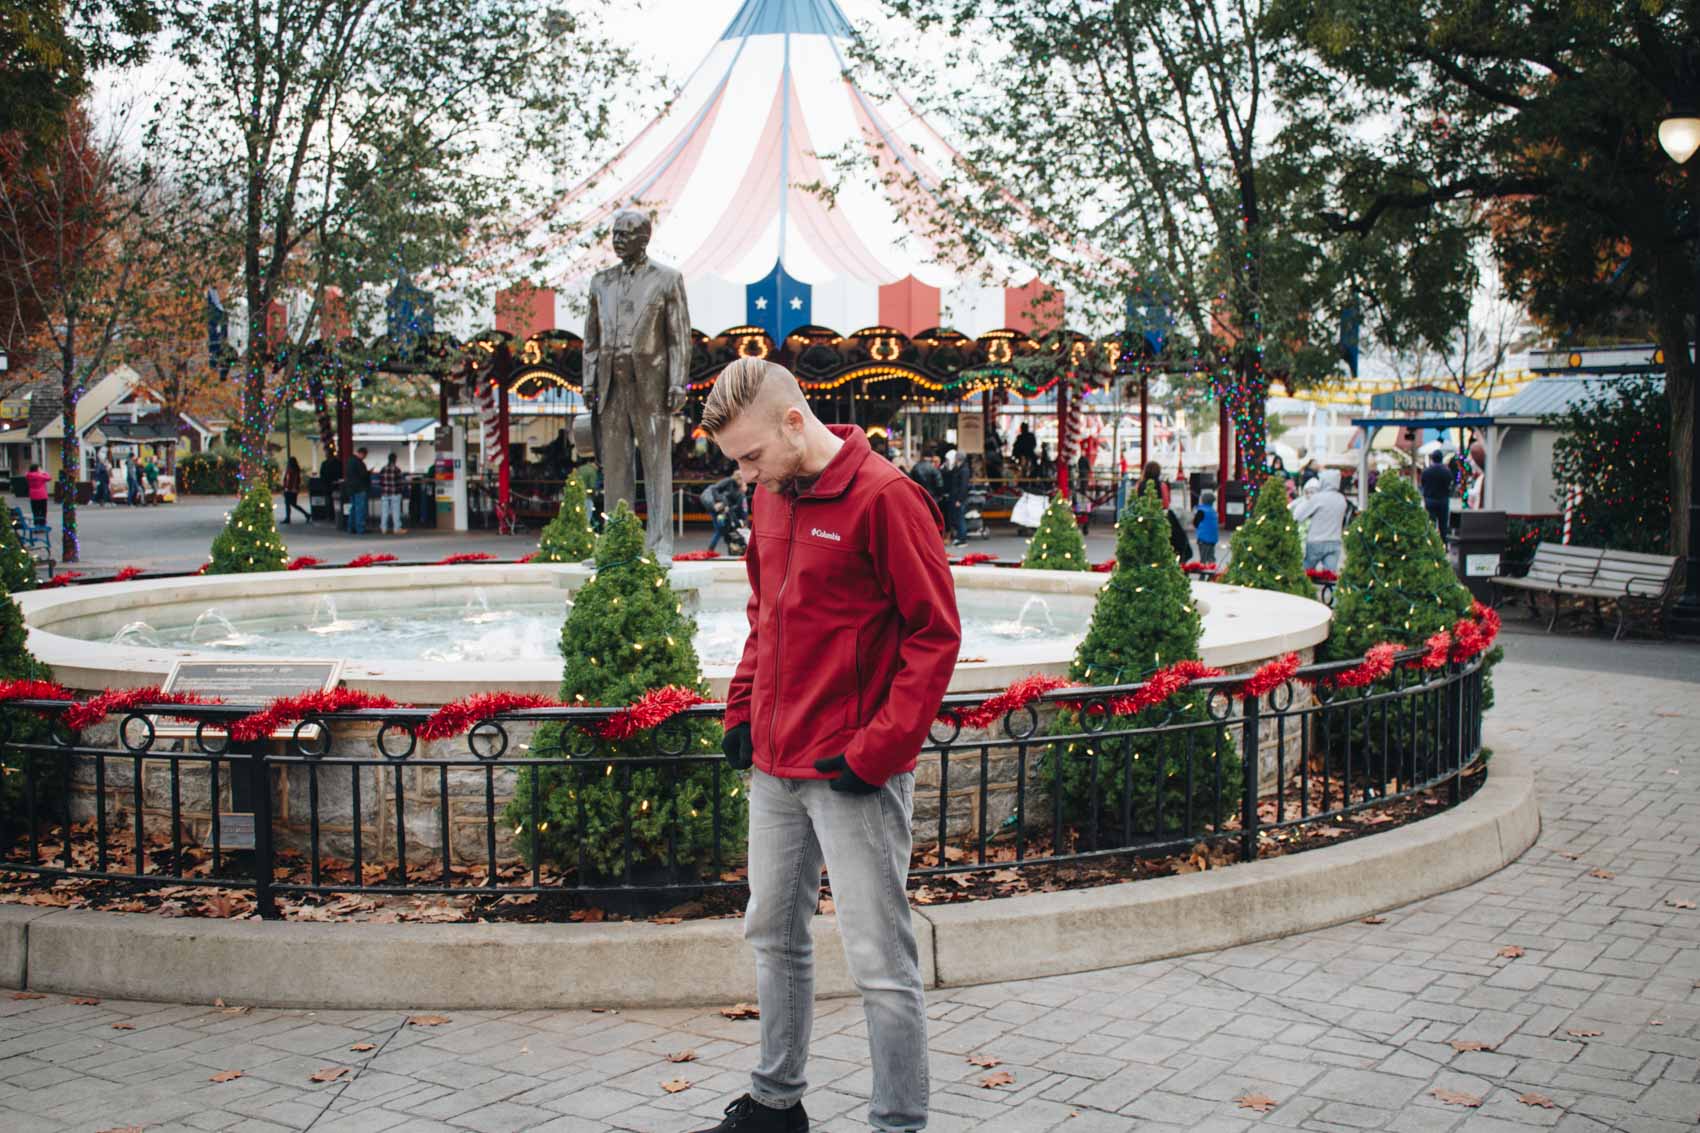 A sweet filled day at Hersheypark's Christmas Candylane.